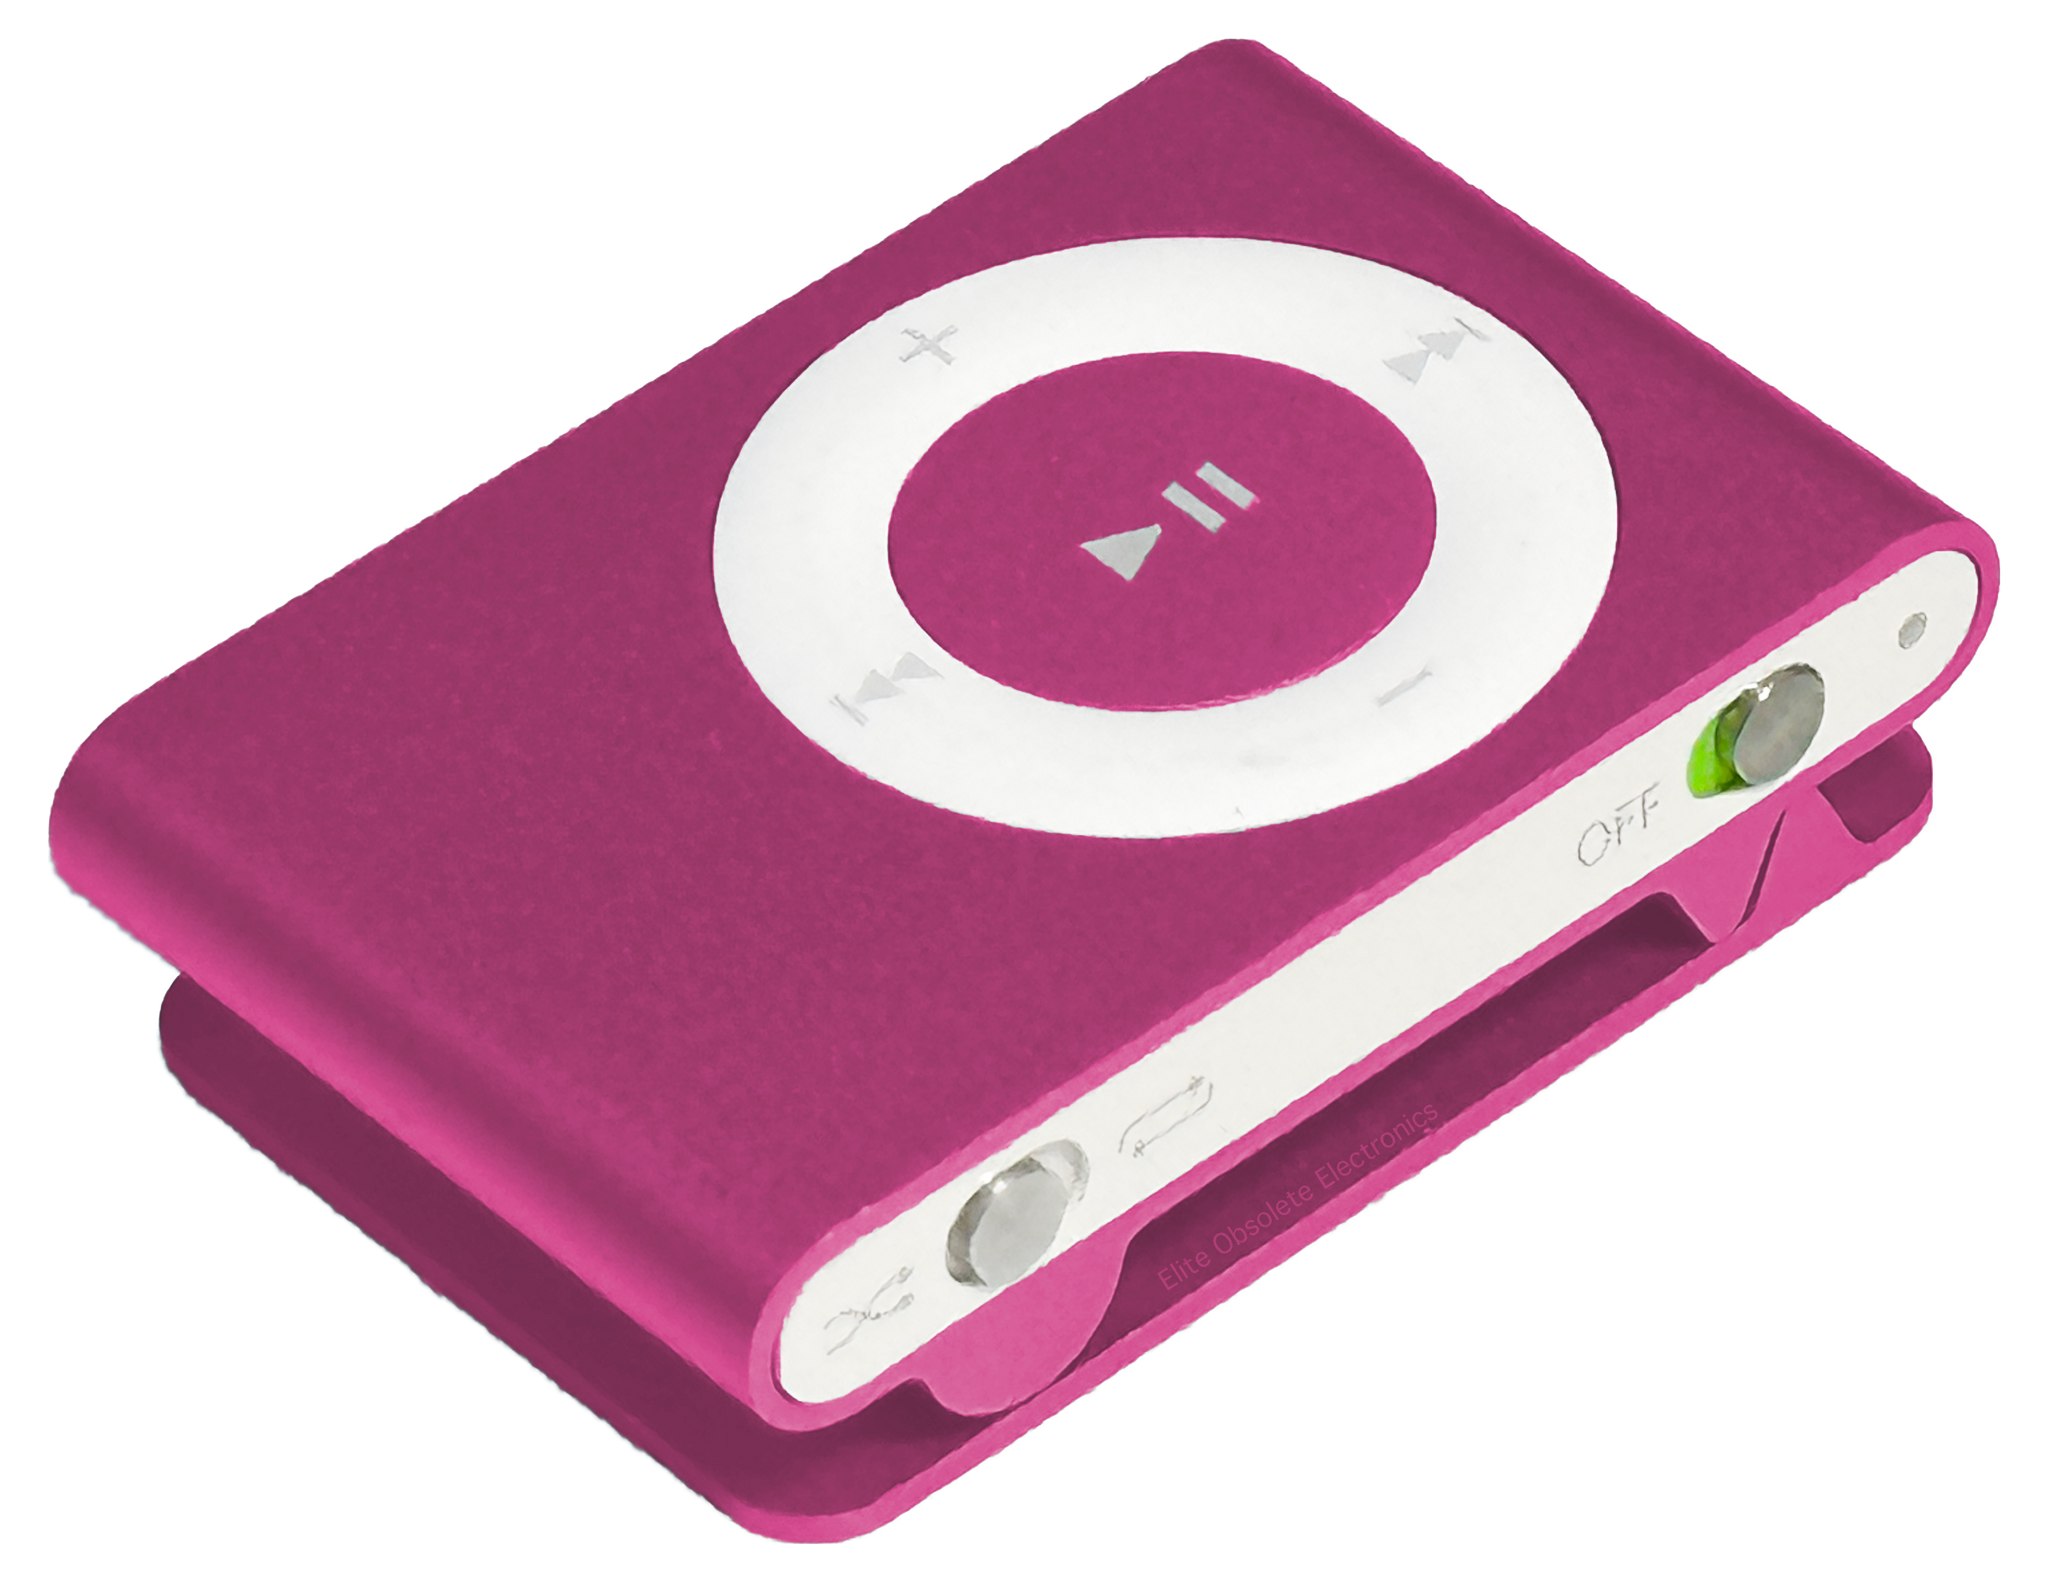 Used Apple iPod Shuffle 2nd Generation 1GB 2GB Hot Pink A1204